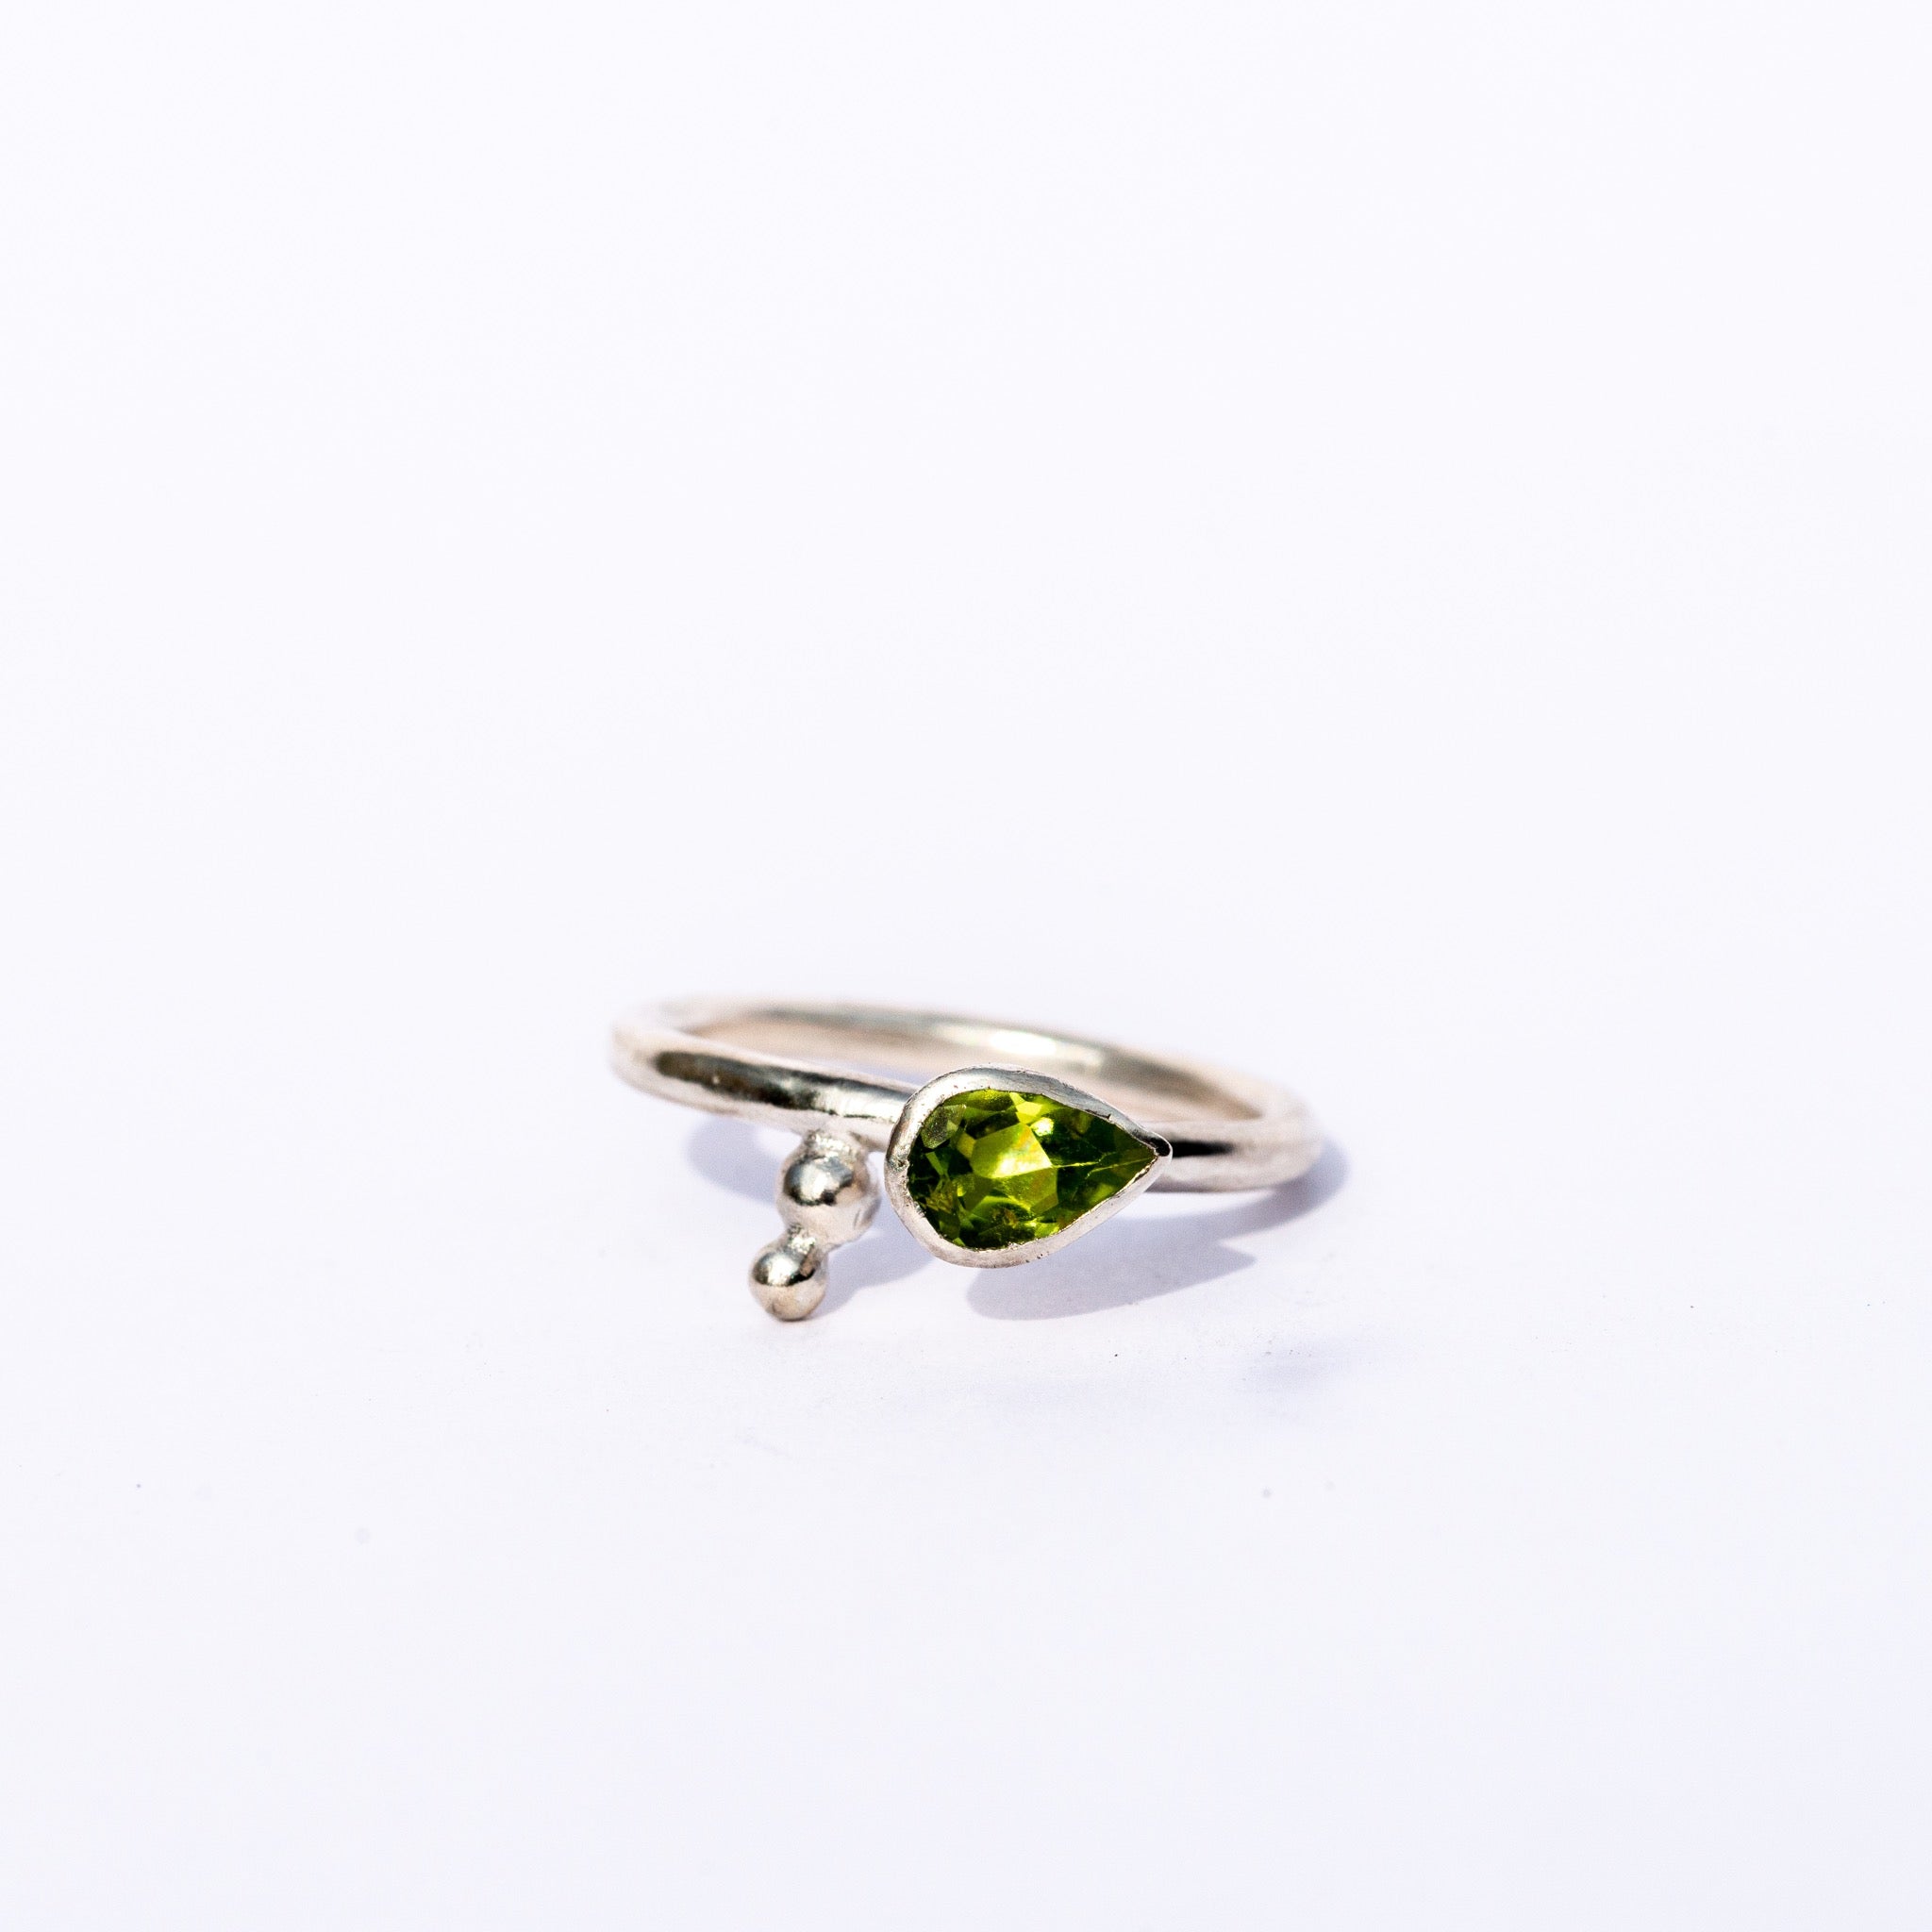 sterling silver ring with peridot drop gemstone 